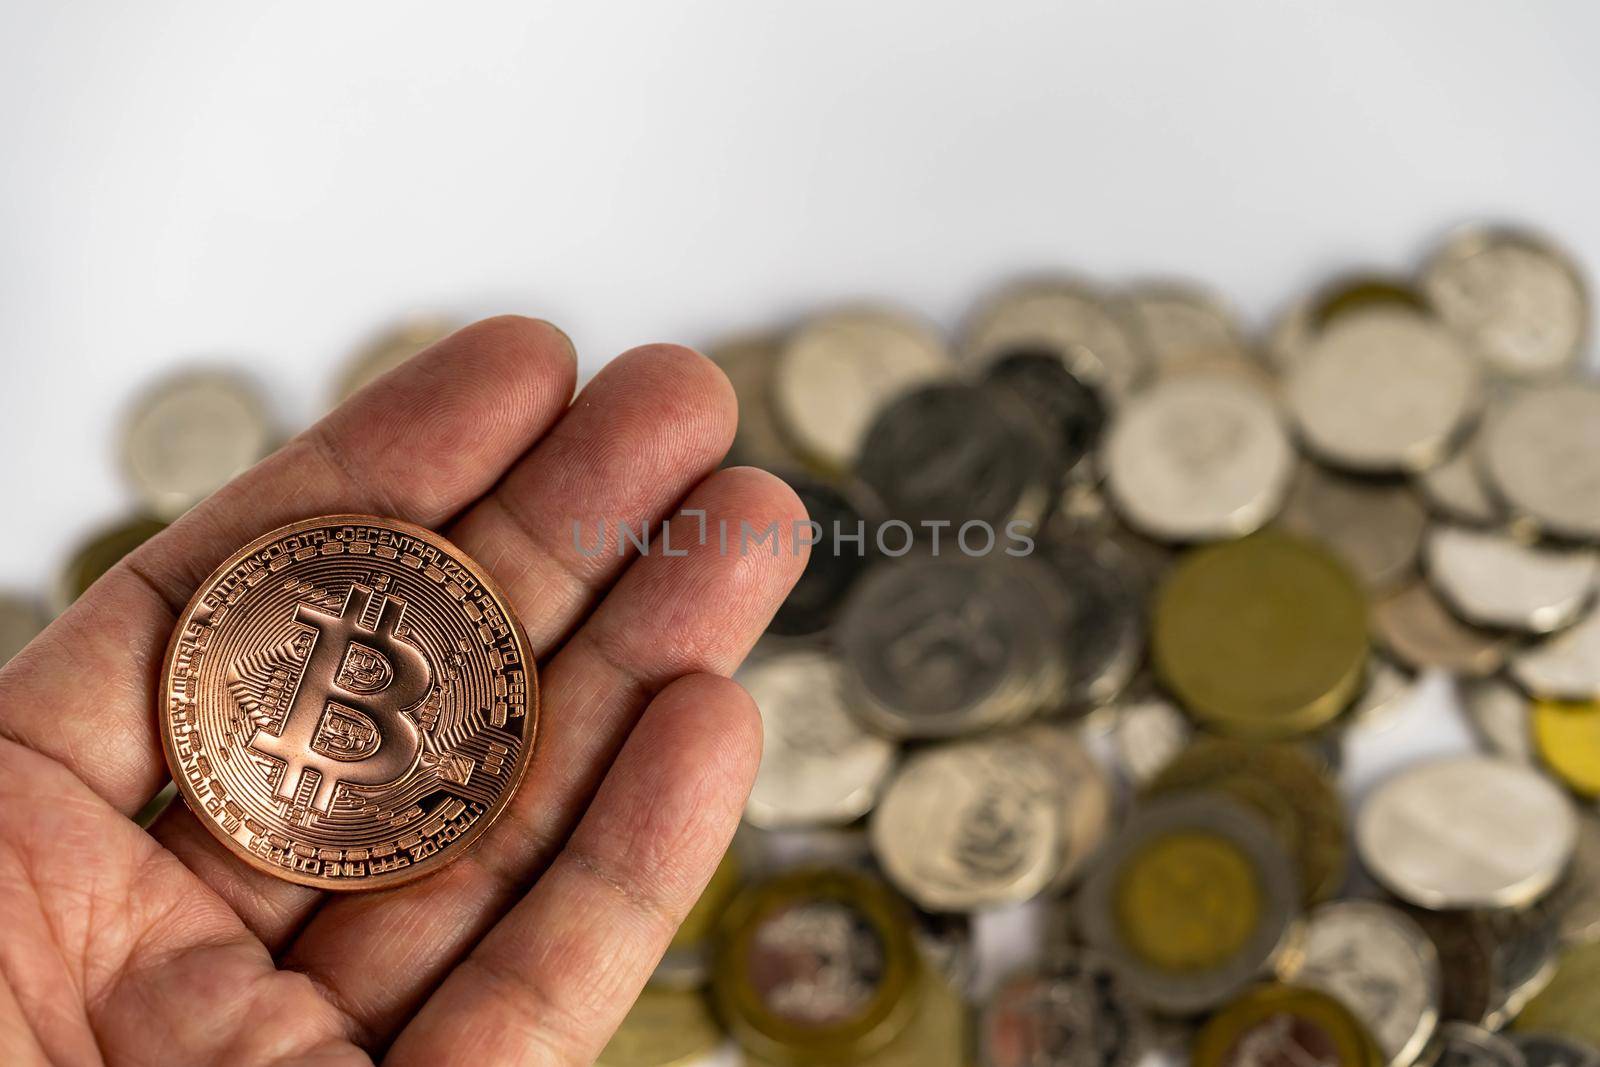 Bitcoin investment concept. Hand holding a bitcoin with blurry coins background